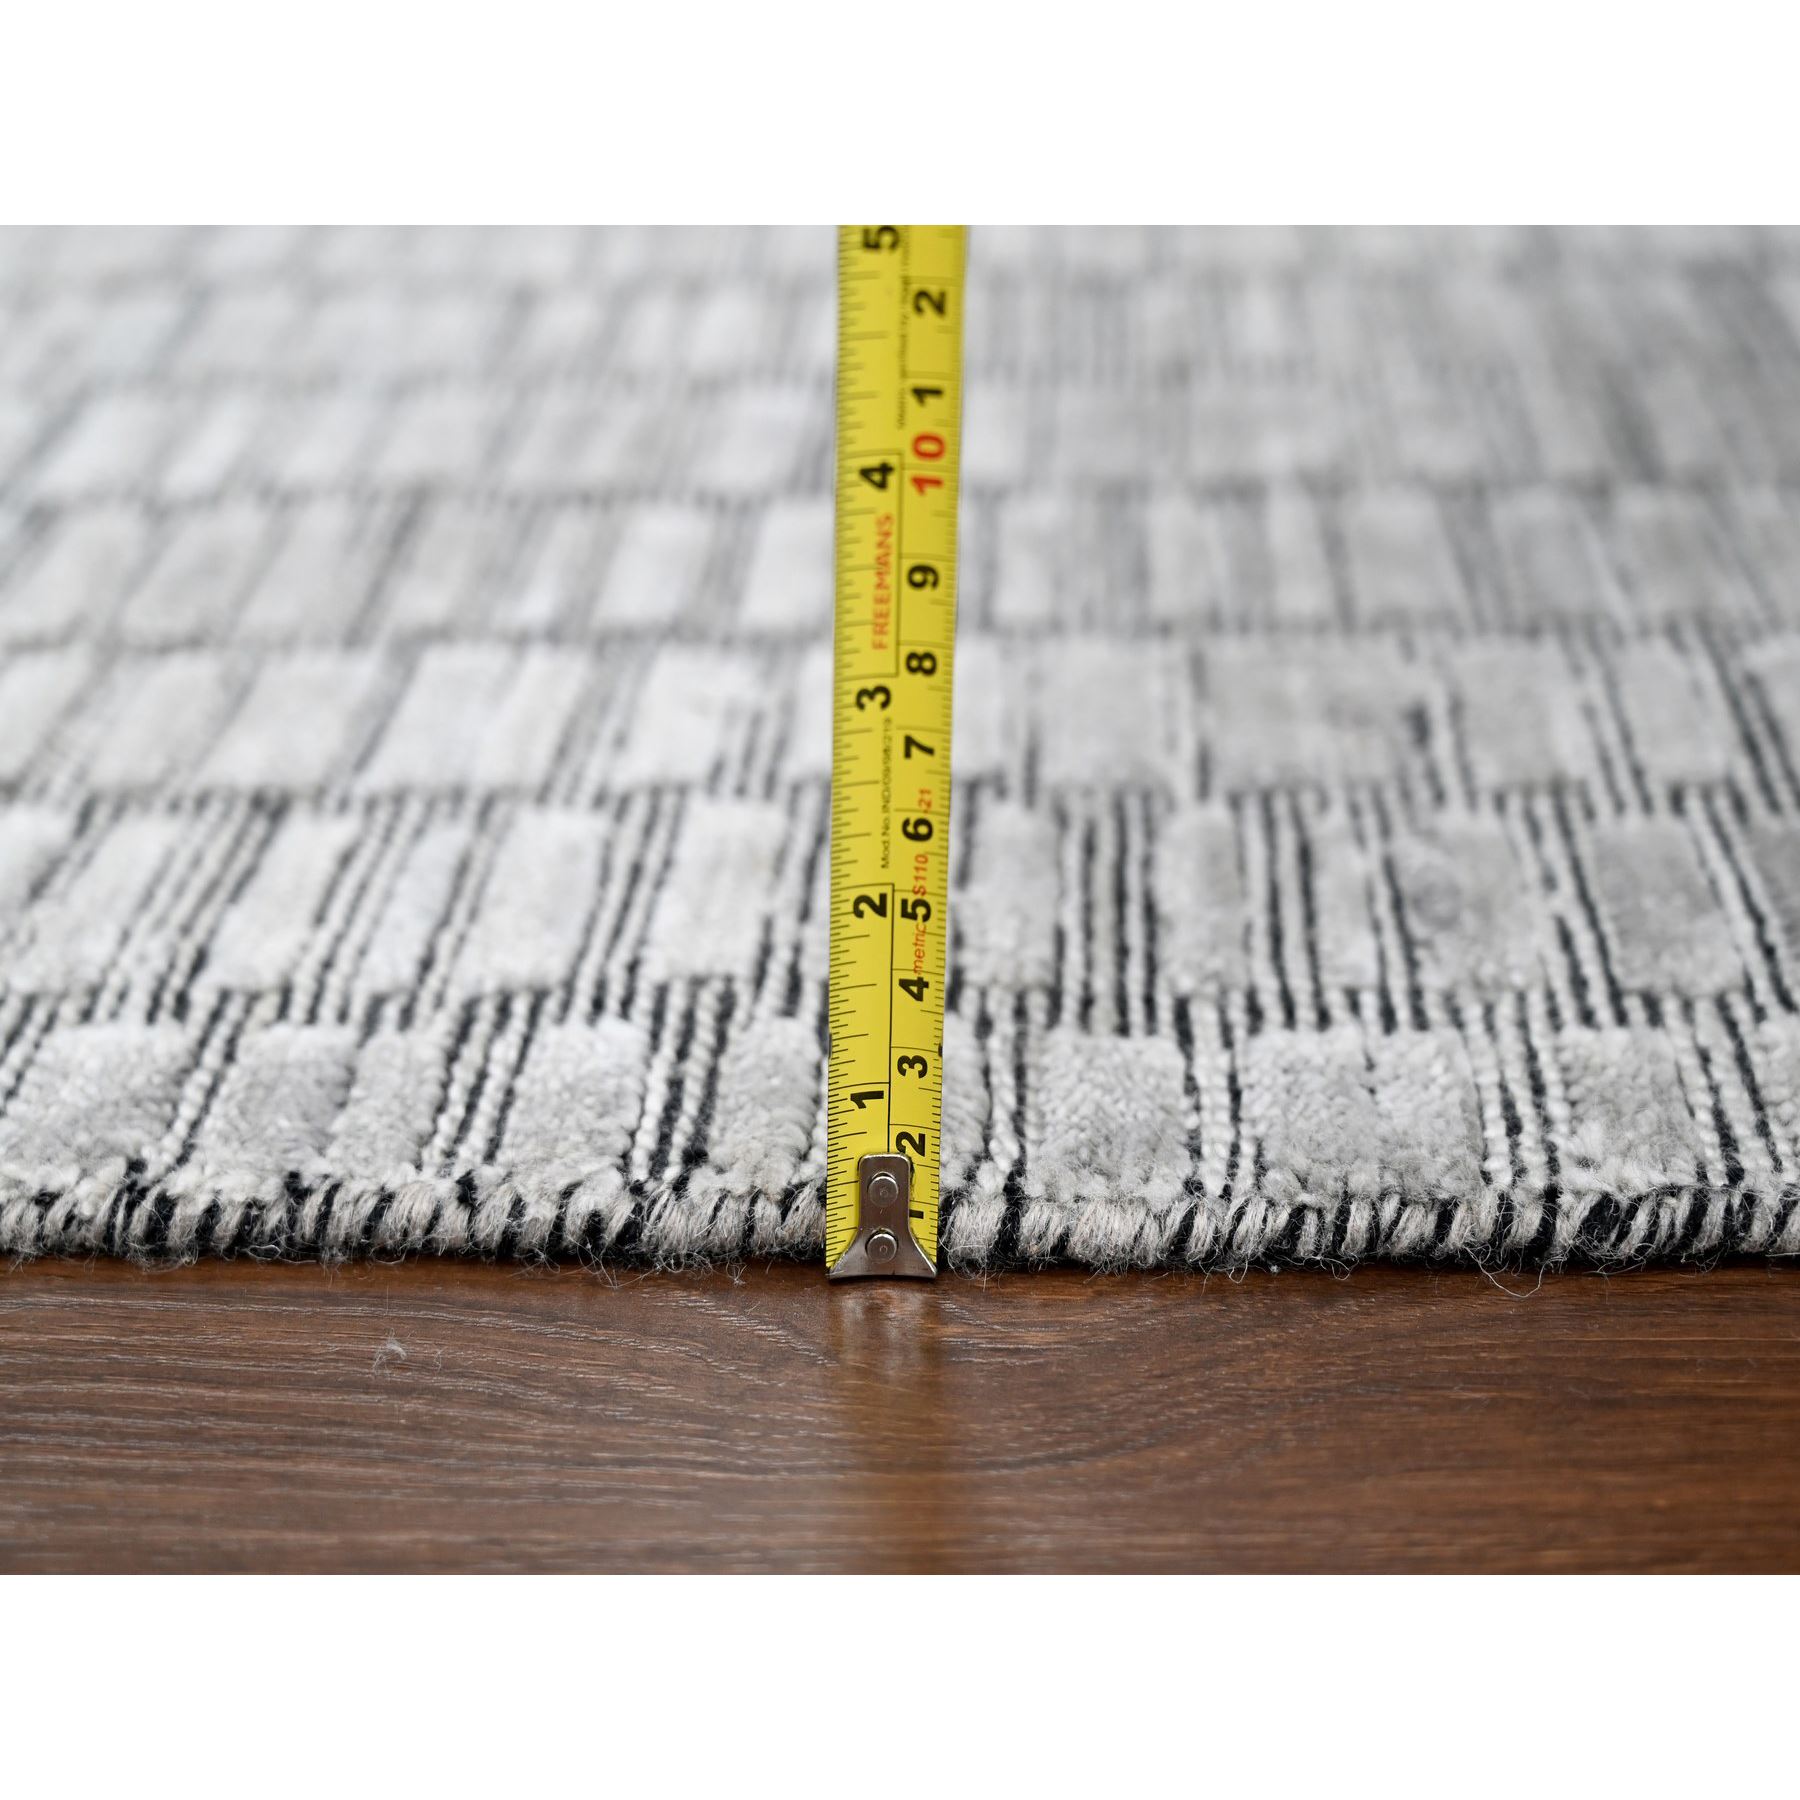 Modern-and-Contemporary-Hand-Loomed-Rug-421485